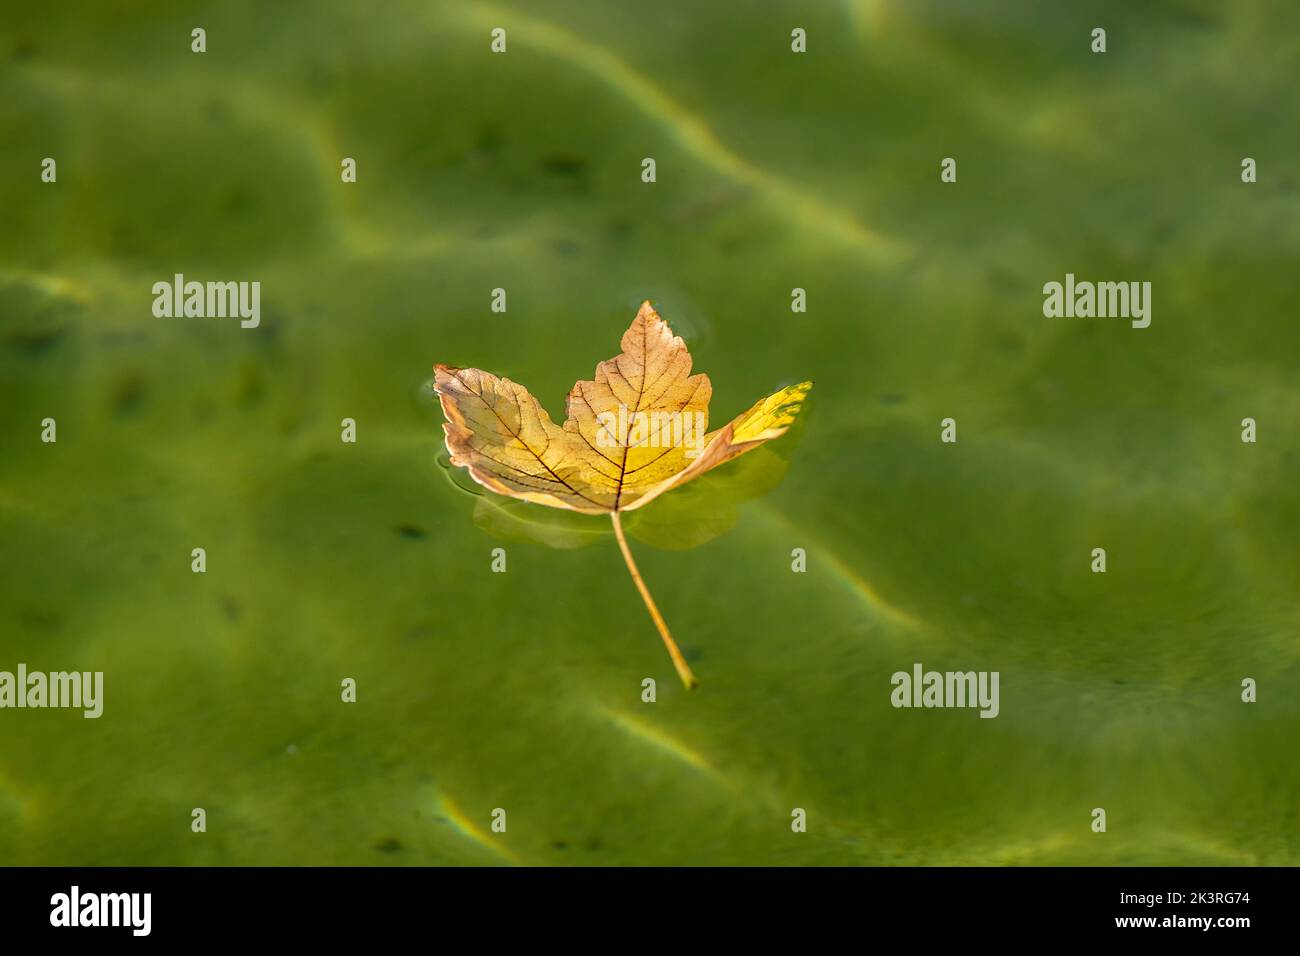 Sycamore Maple.  Acer pseudoplatanus  leaf floating on water with copyspace, Abington Park, Boating lake, Northampton, UK. Stock Photo